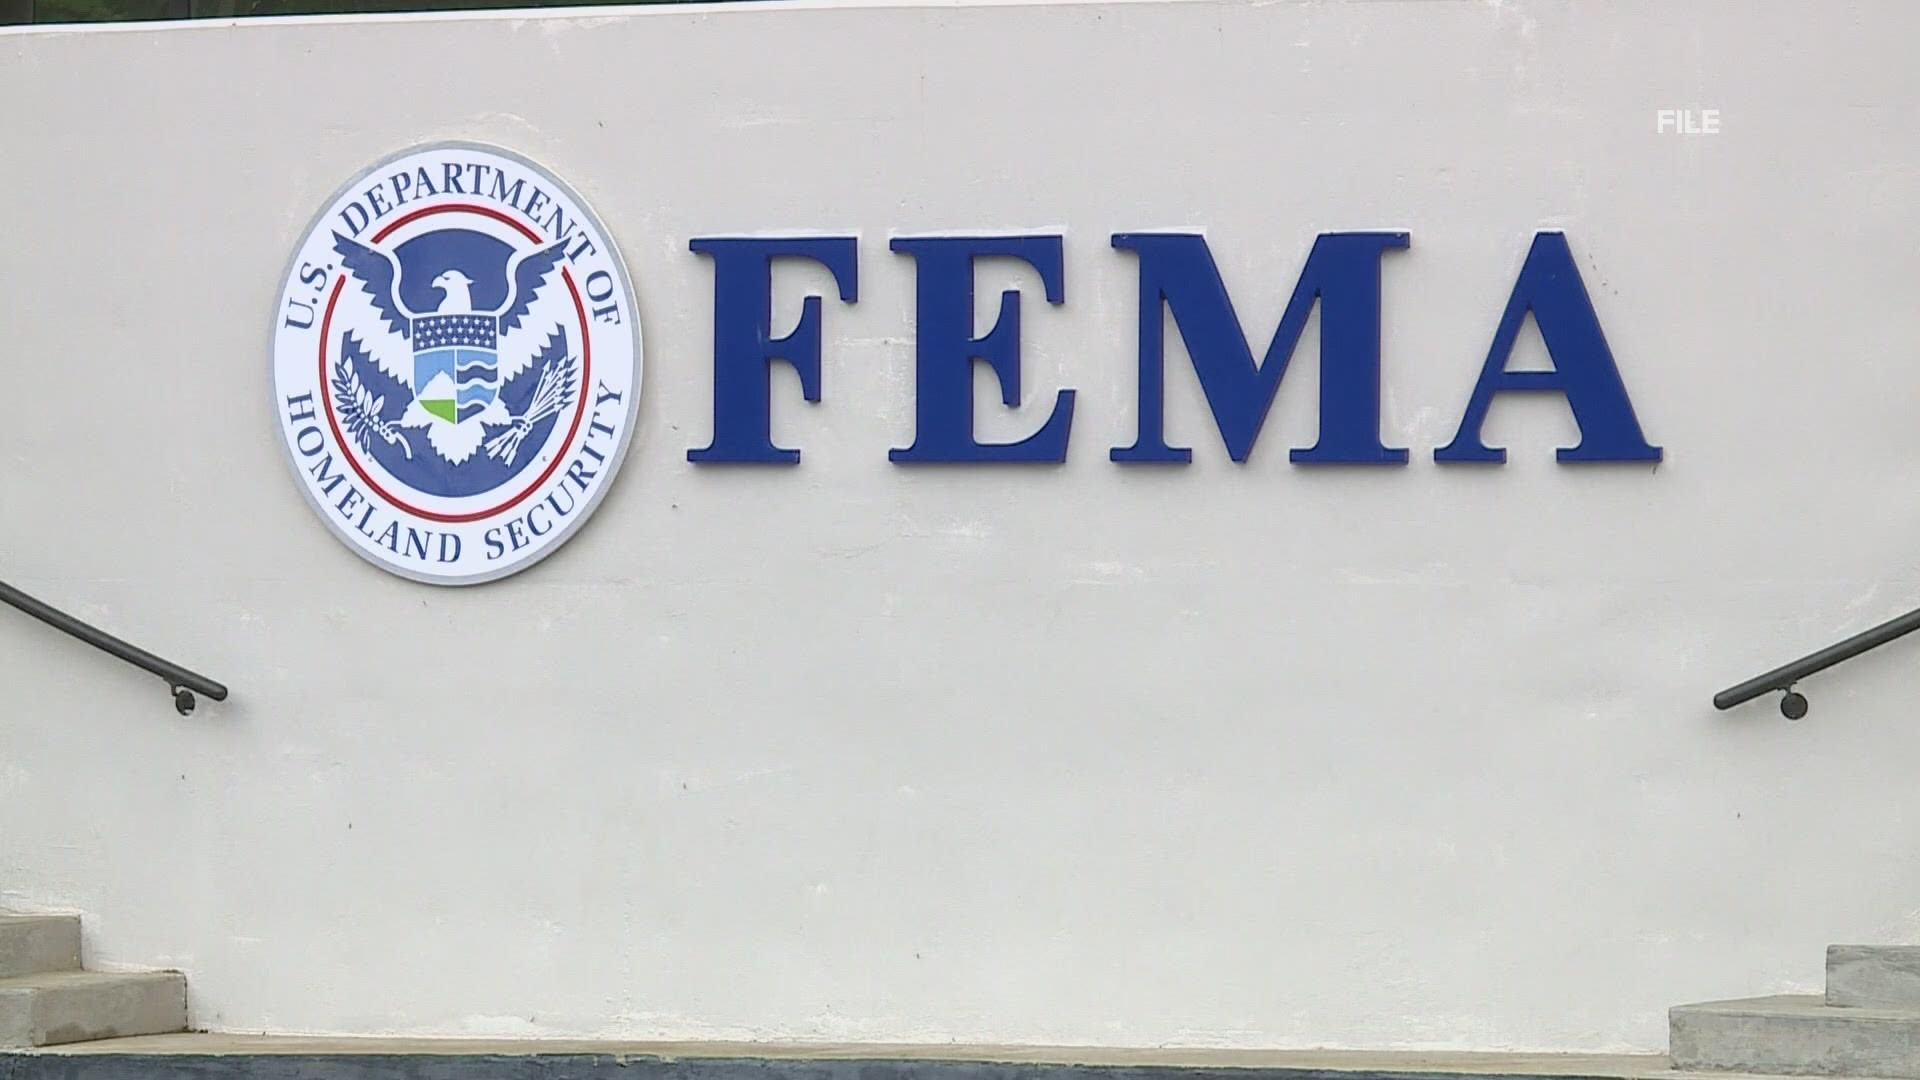 The Federal Emergency Management Agency launched a new program to offer reimbursements of up to $9,000 to cover costs of funerals for those who have lost their lives